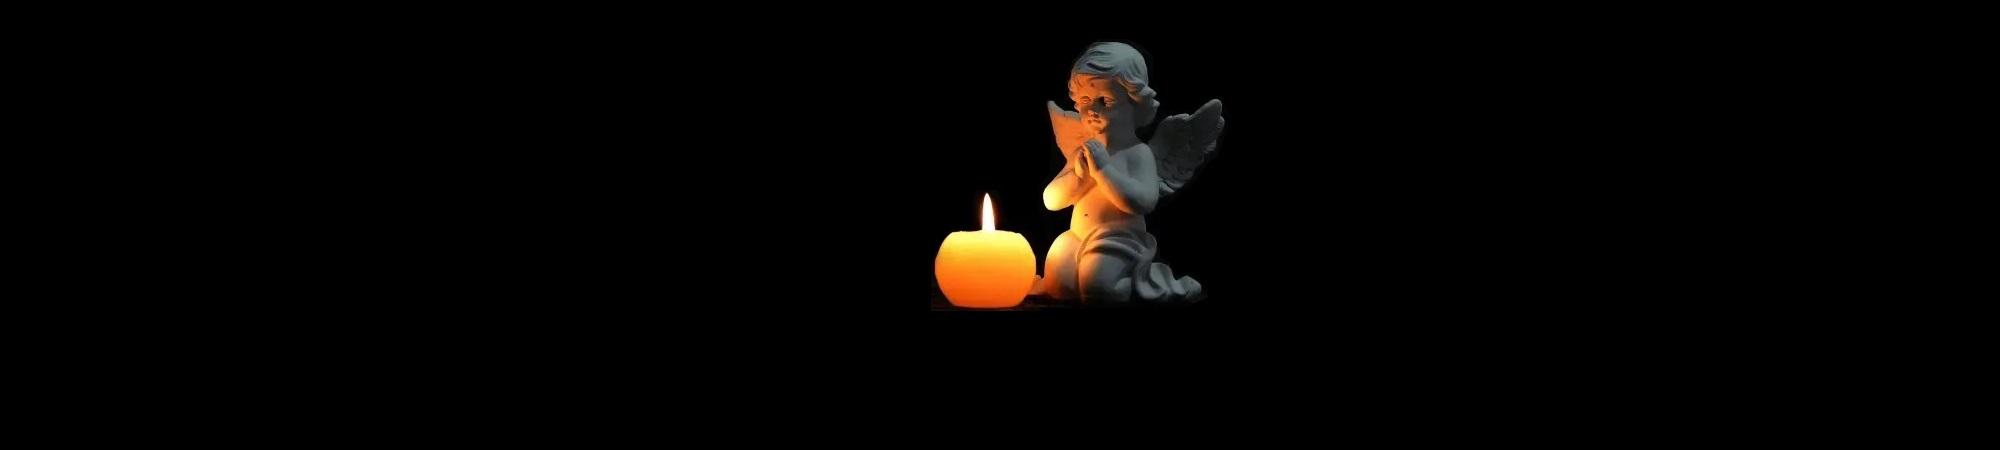 Small cherub angel kneels before lighted candle.